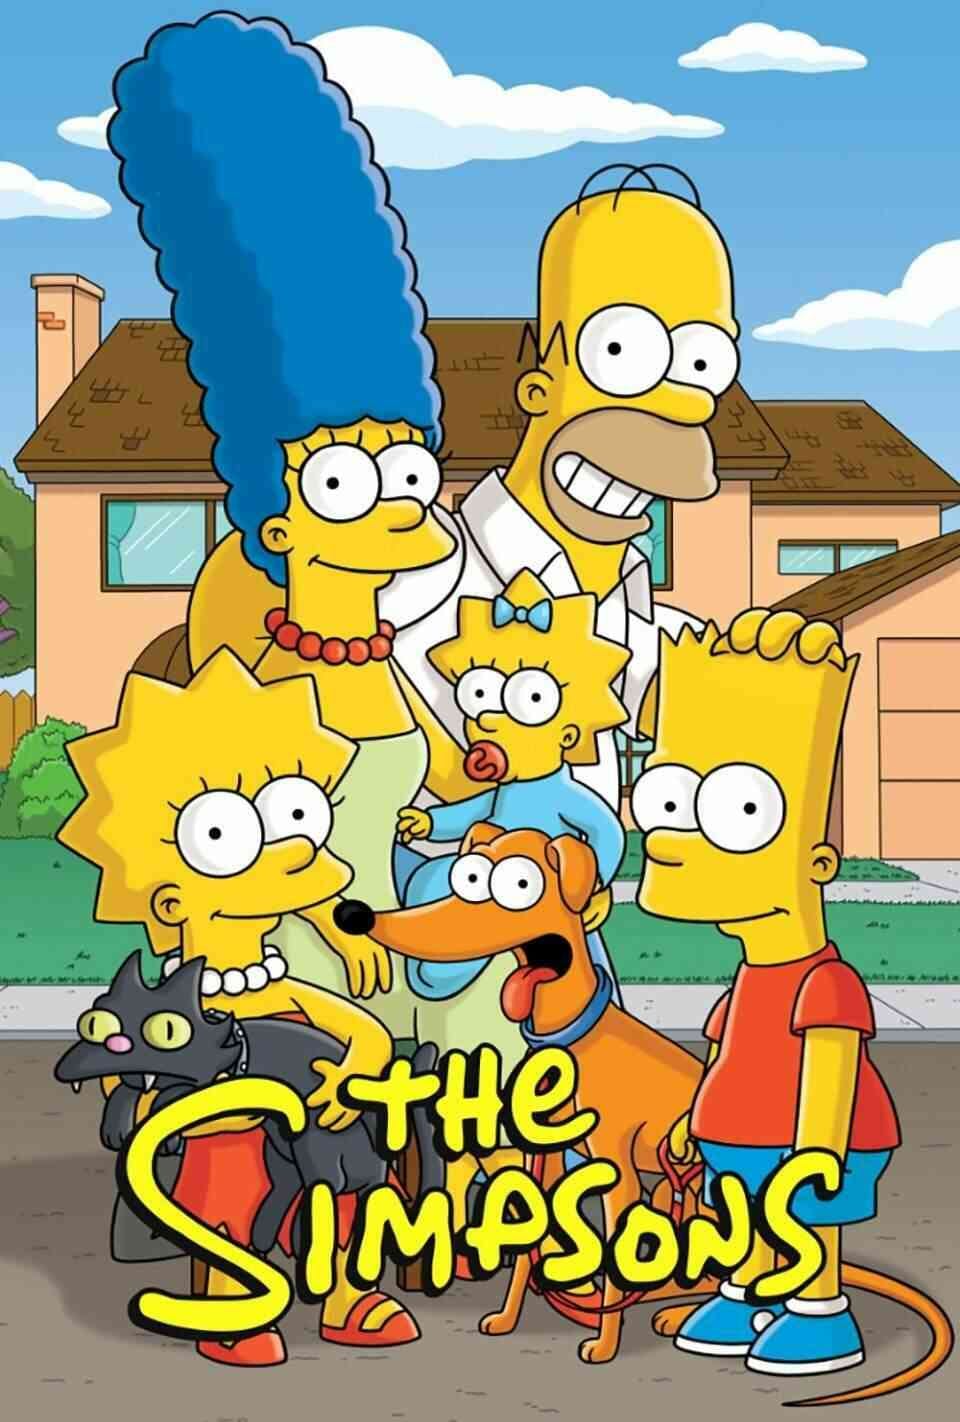 Read The Simpsons screenplay (poster)